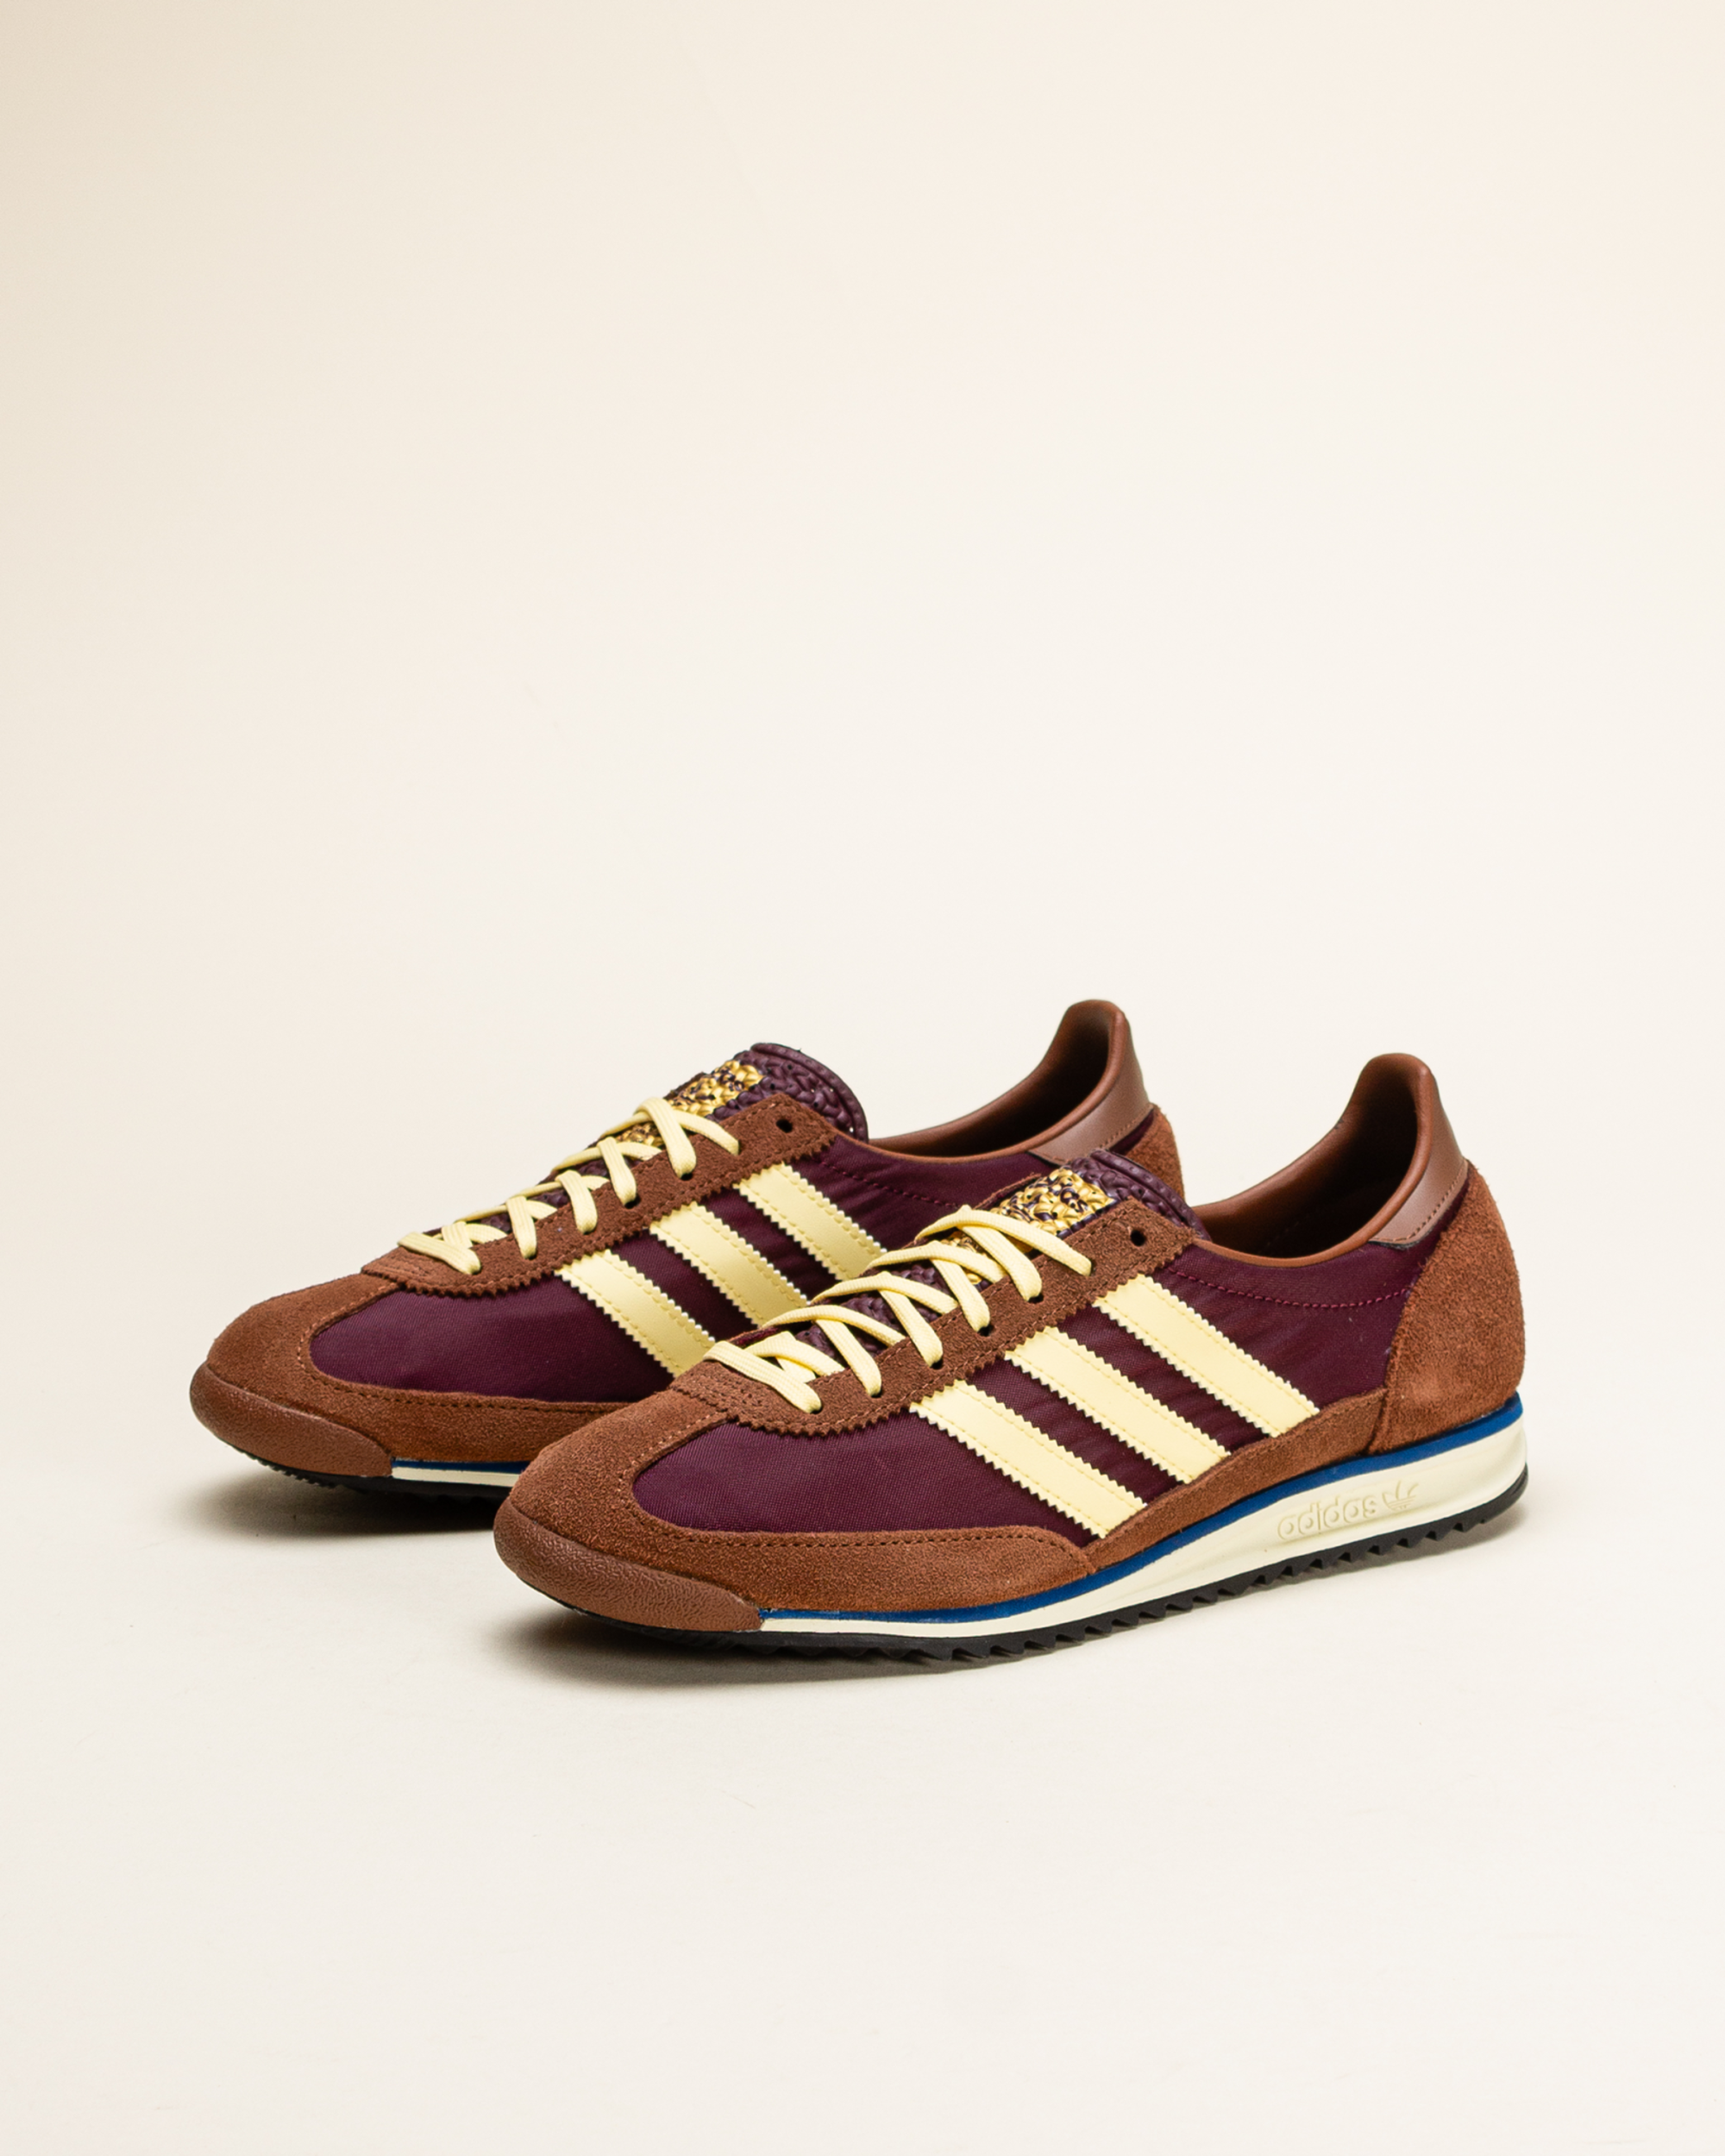 Adidas SL 72 OG W - Maroon / Almost Yellow / Preloved Brown